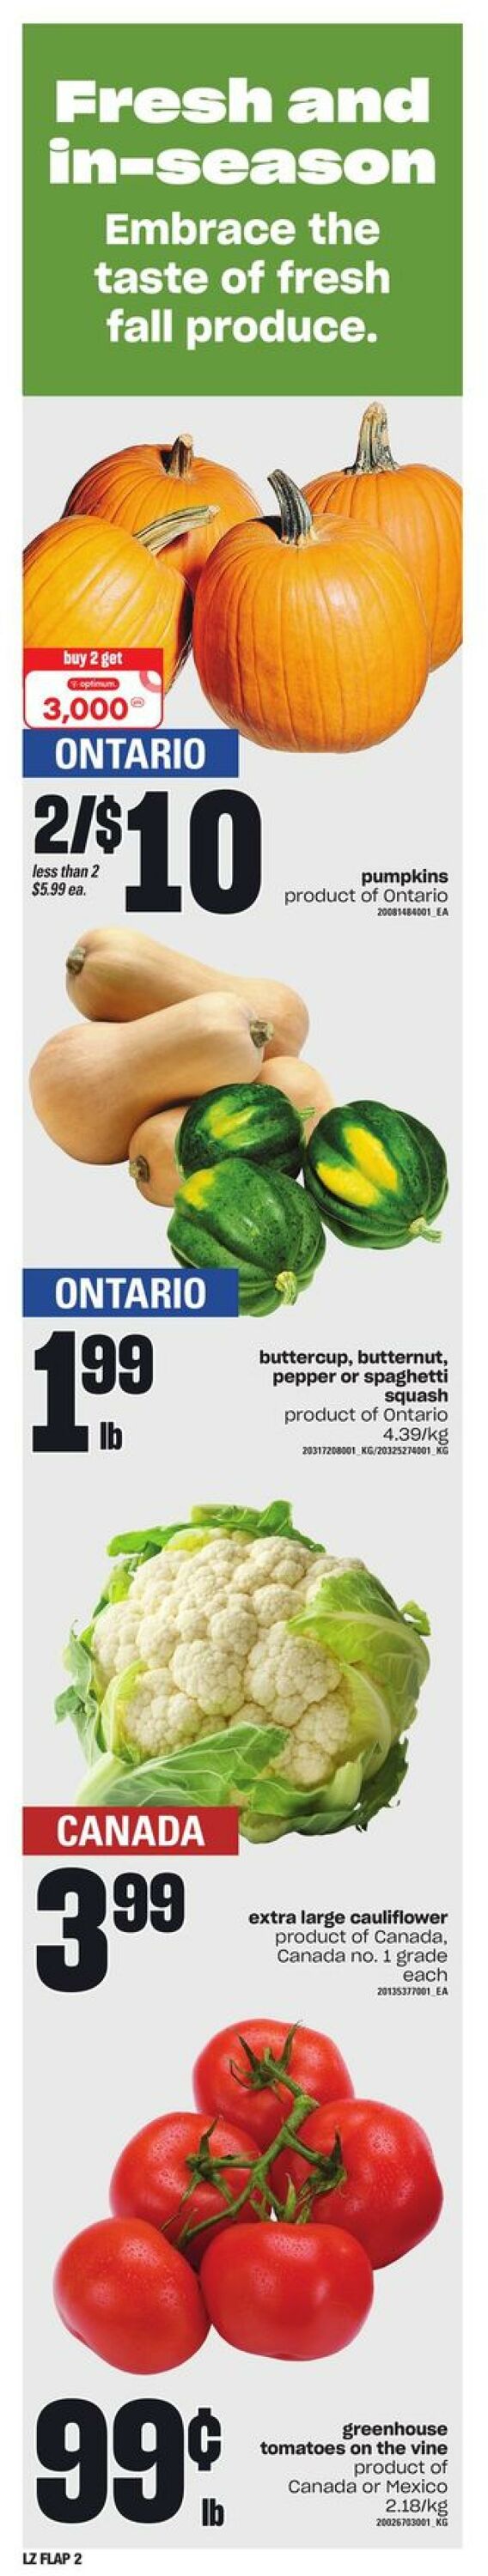 Zehrs Flyer - 10/13-10/19/2022 (Page 3)